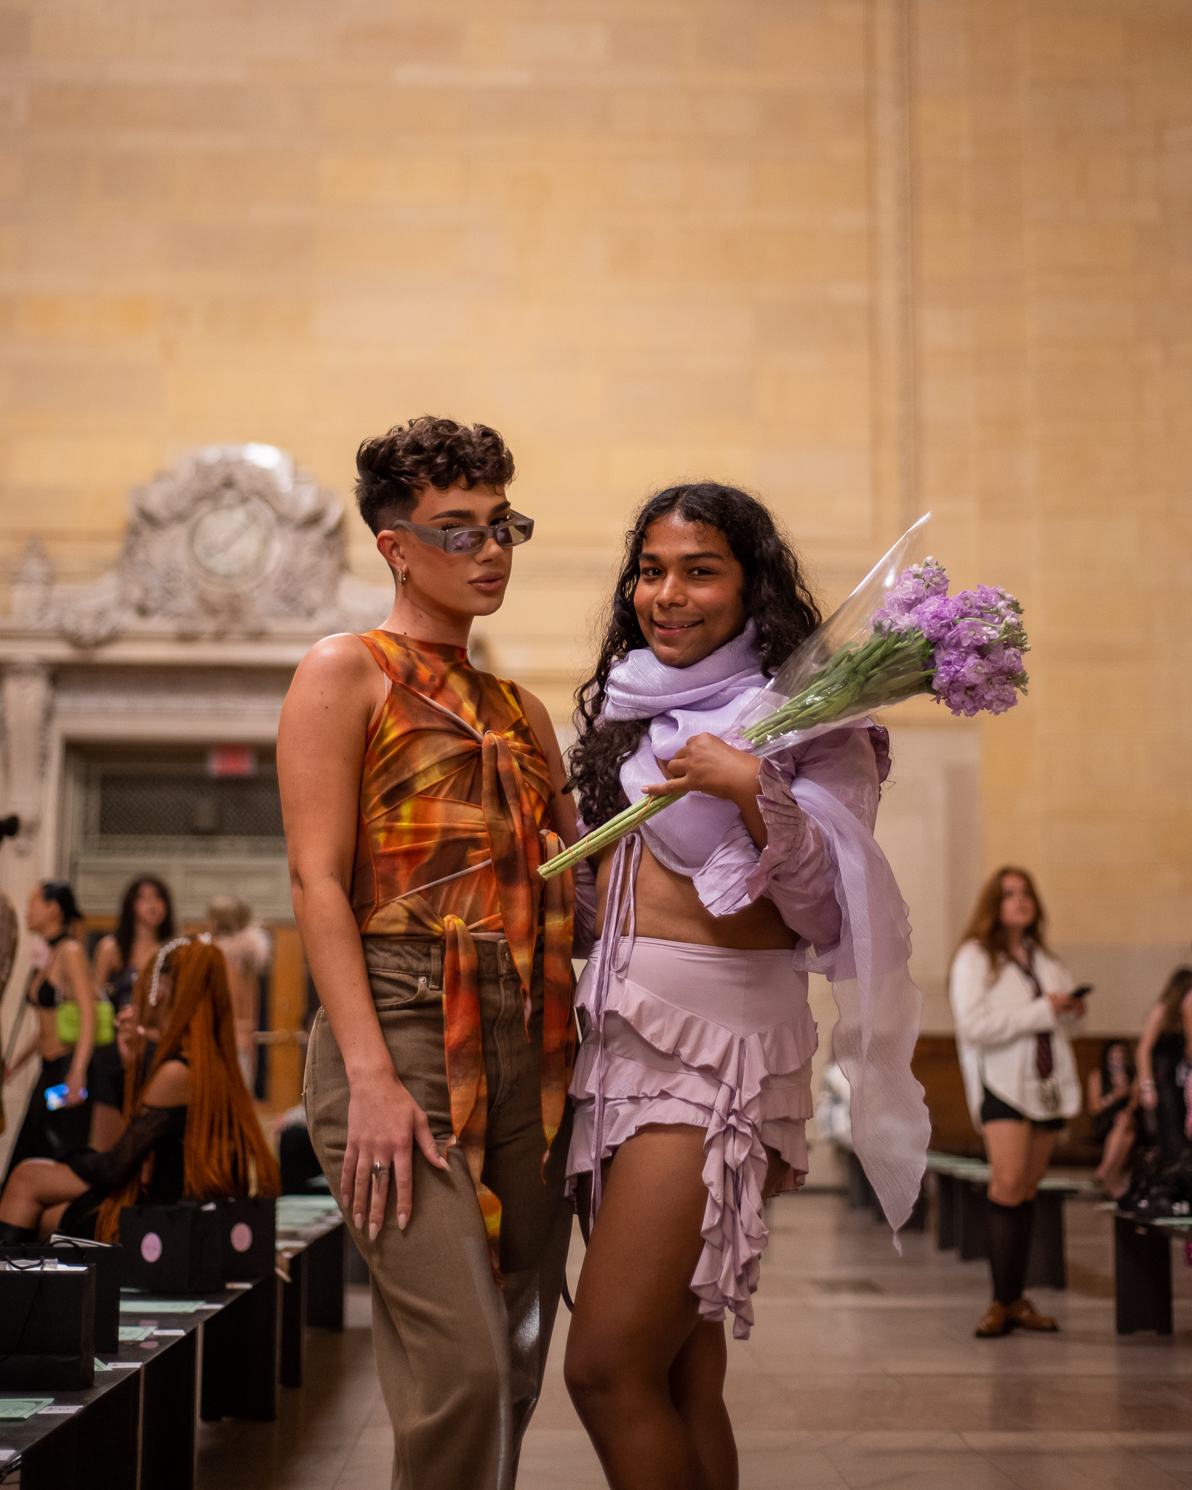 James Charles wearing an orange printed top and Devin Halbal wearing a purple outfit stand in Grand Central Terminal.